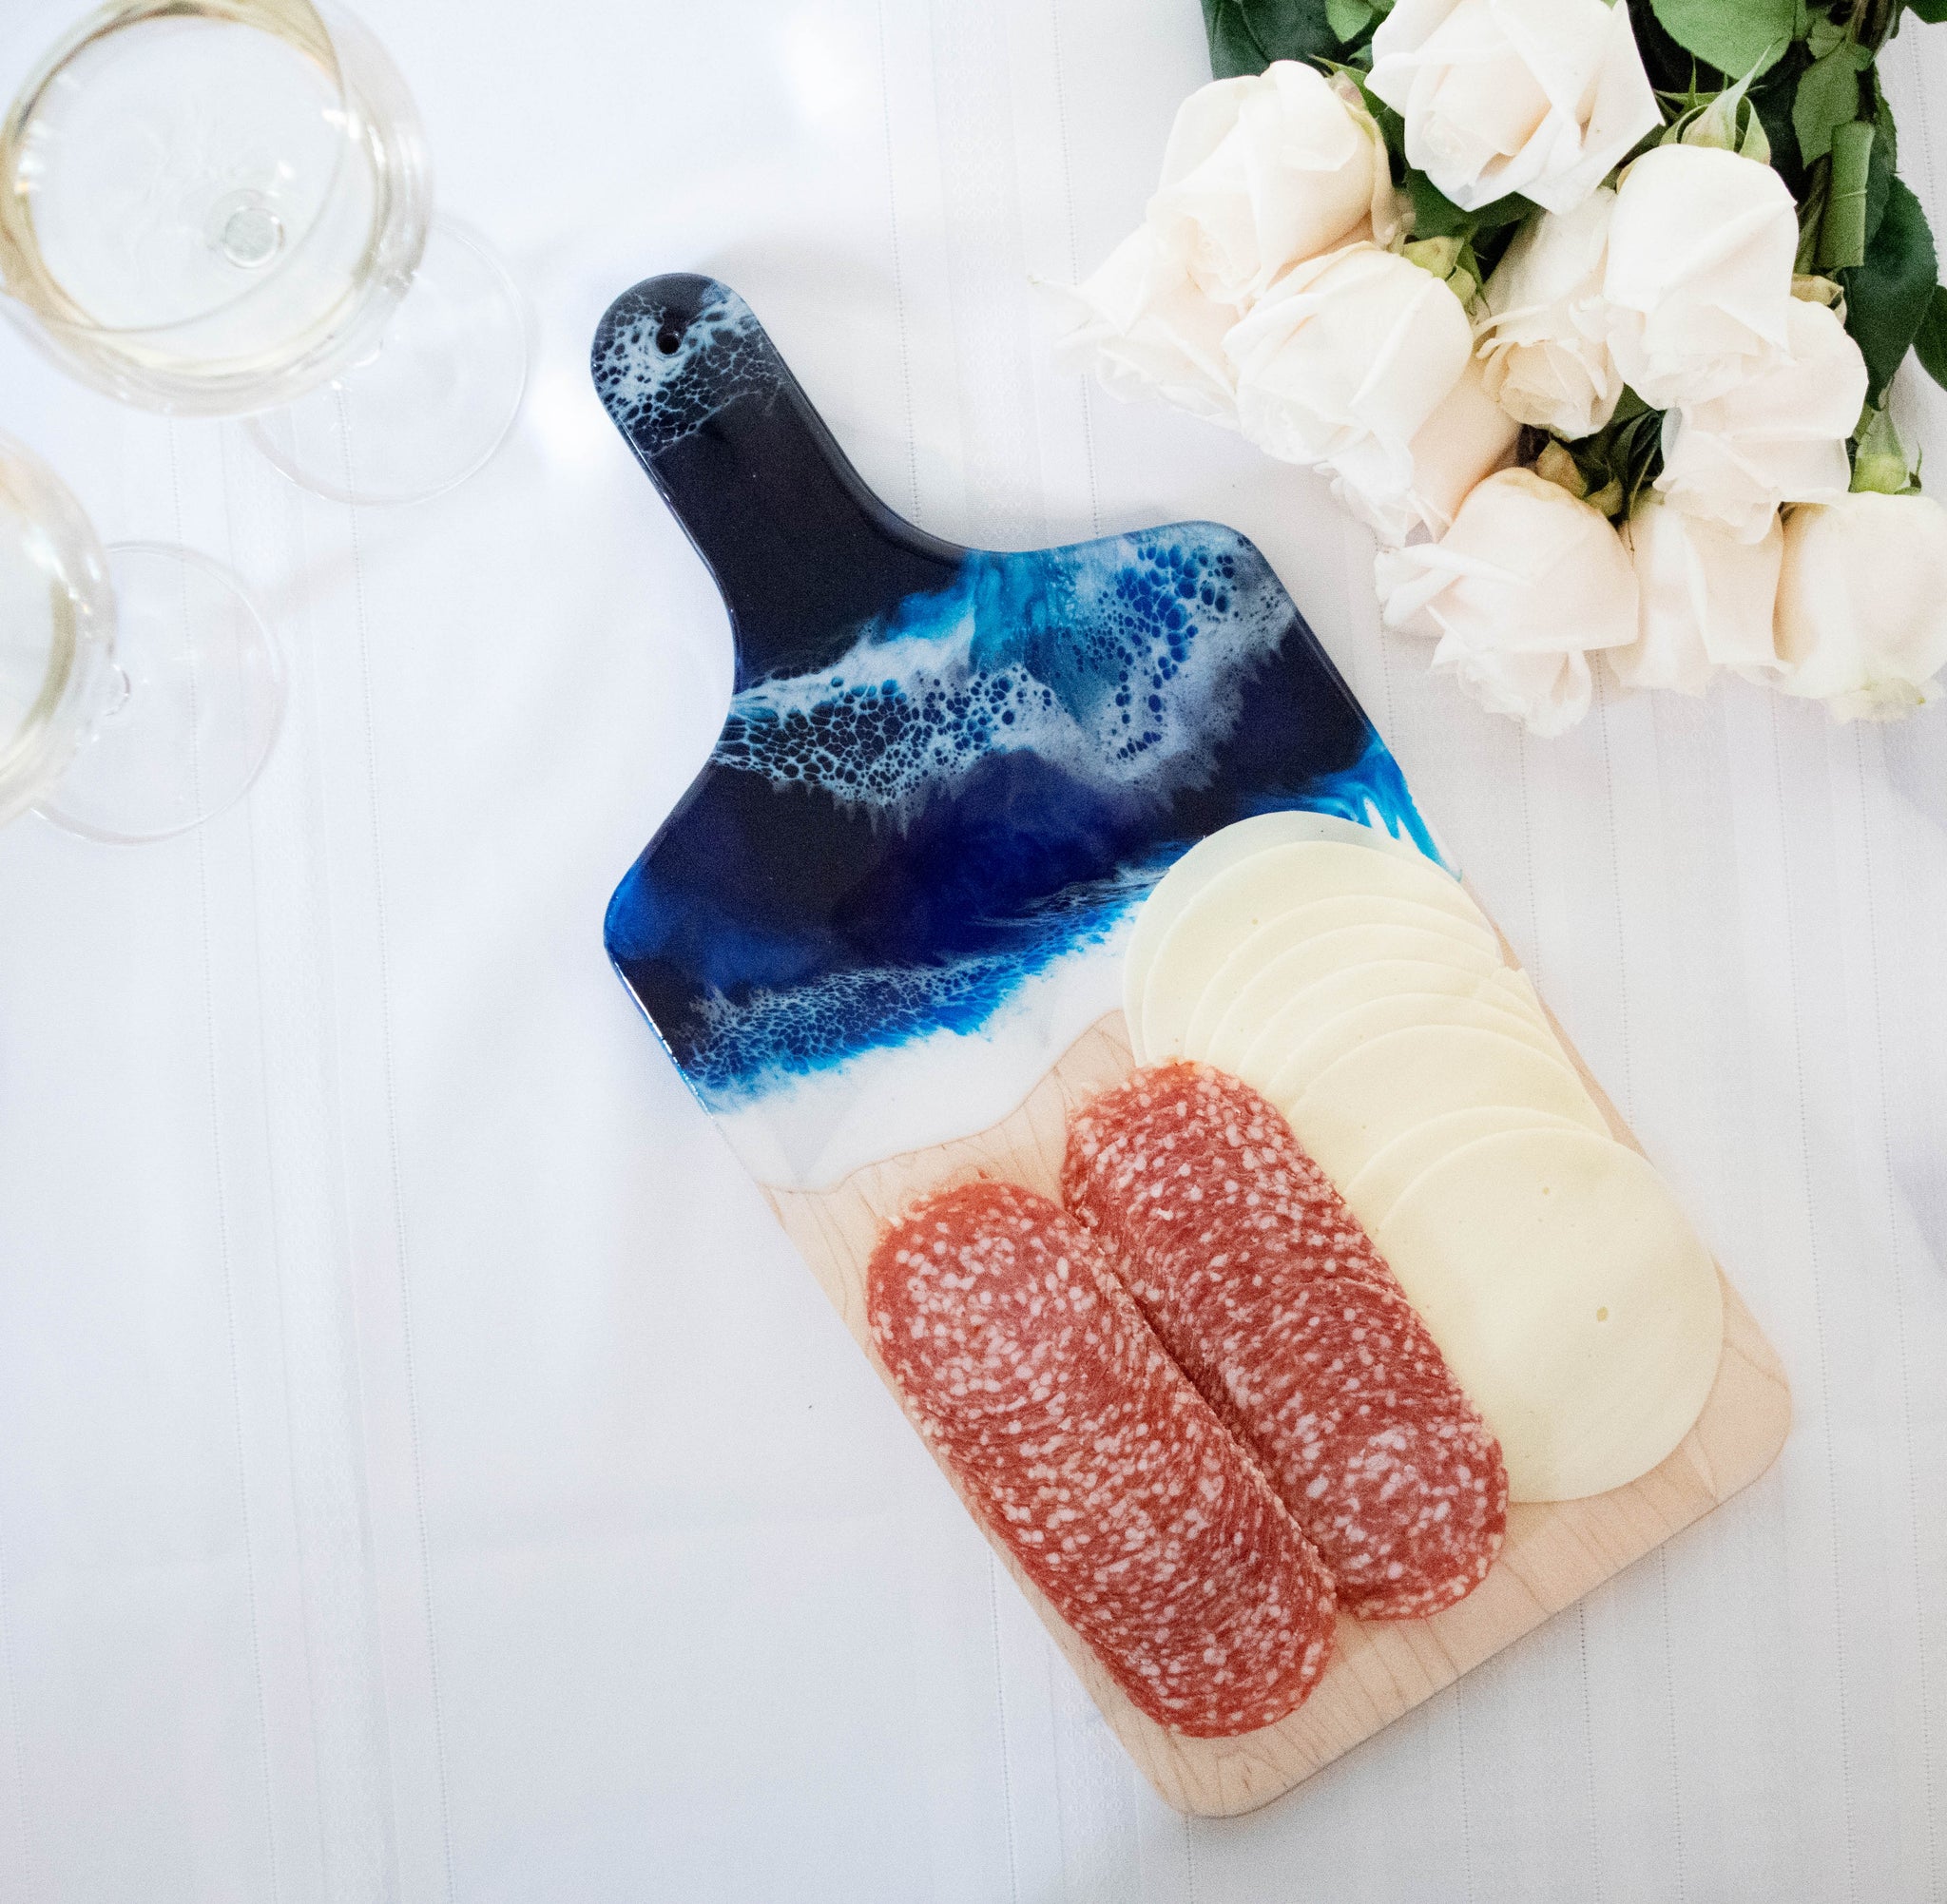 SBL Charcuterie Serving Board Decorated with Glass and Colored Resin 1 –